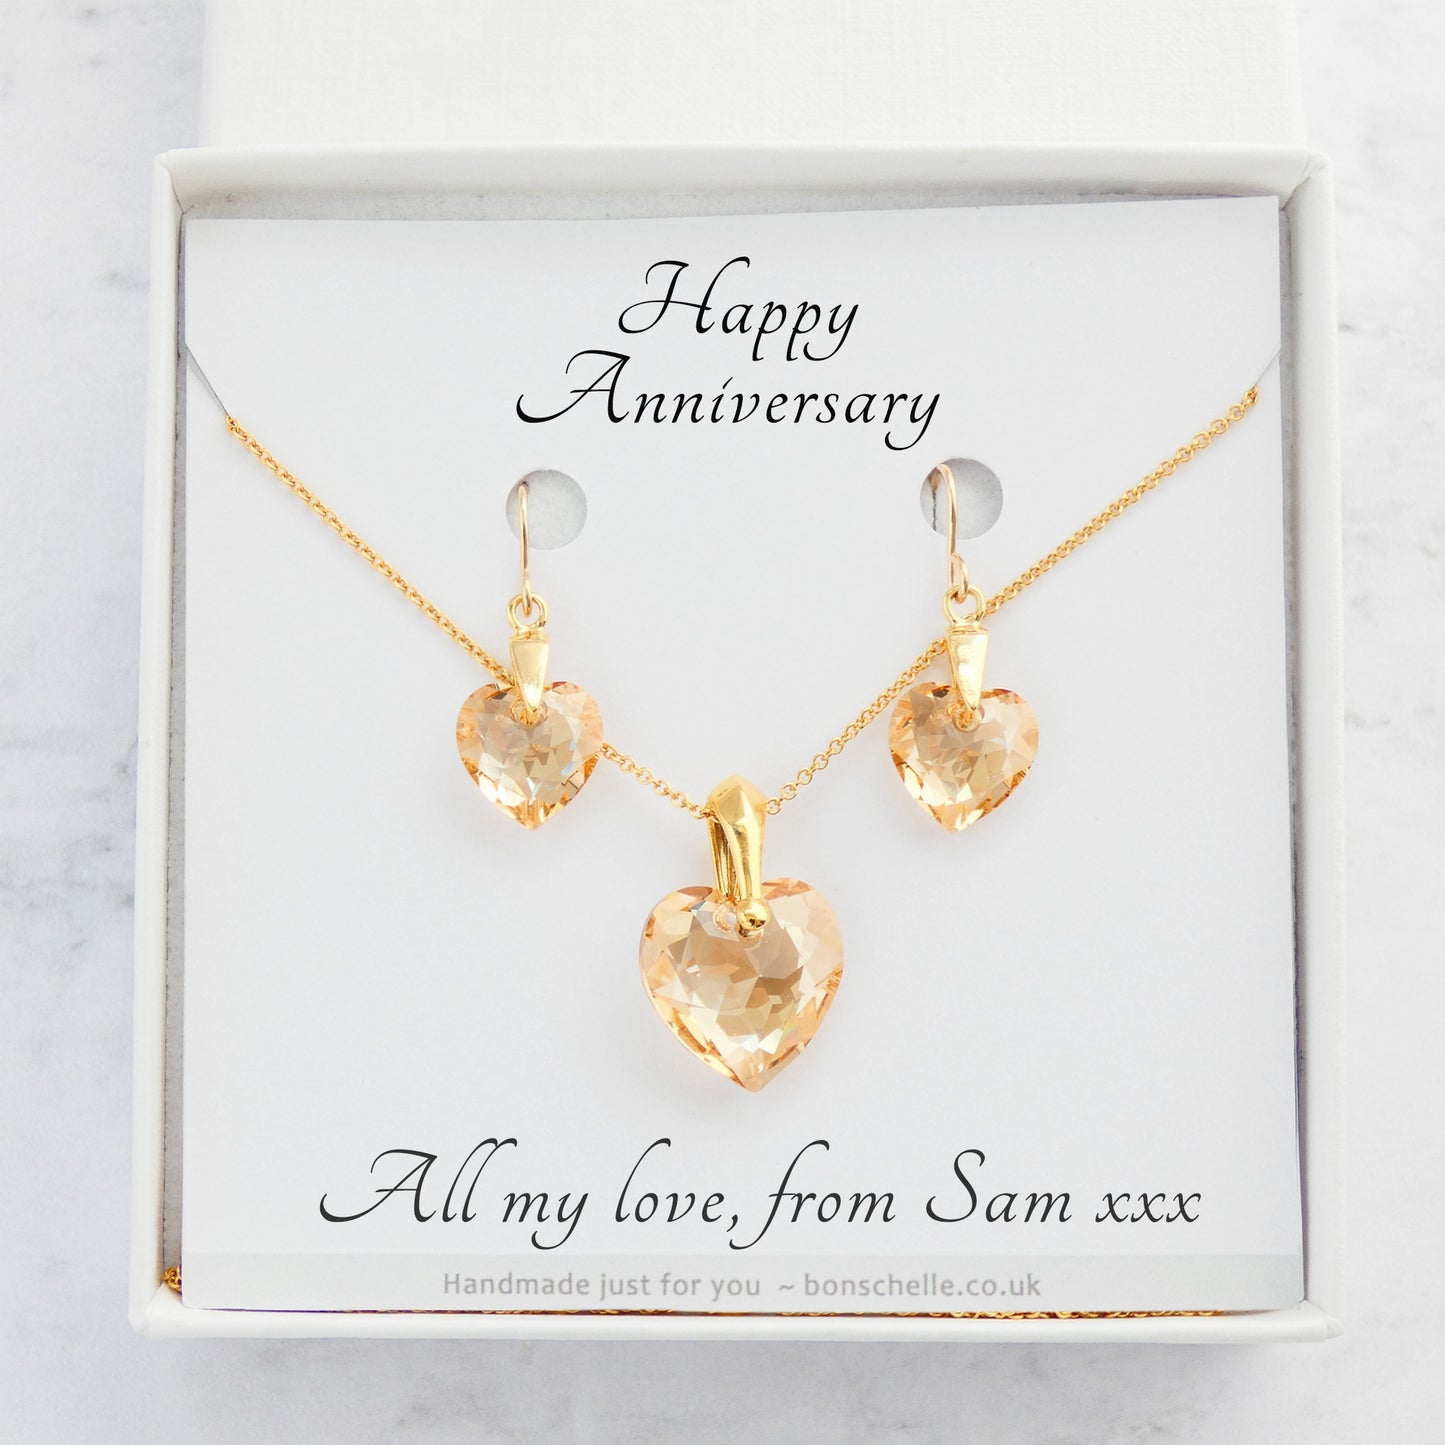 Plae golden cut crystal heart necklace and earrings set with a personalised gift message